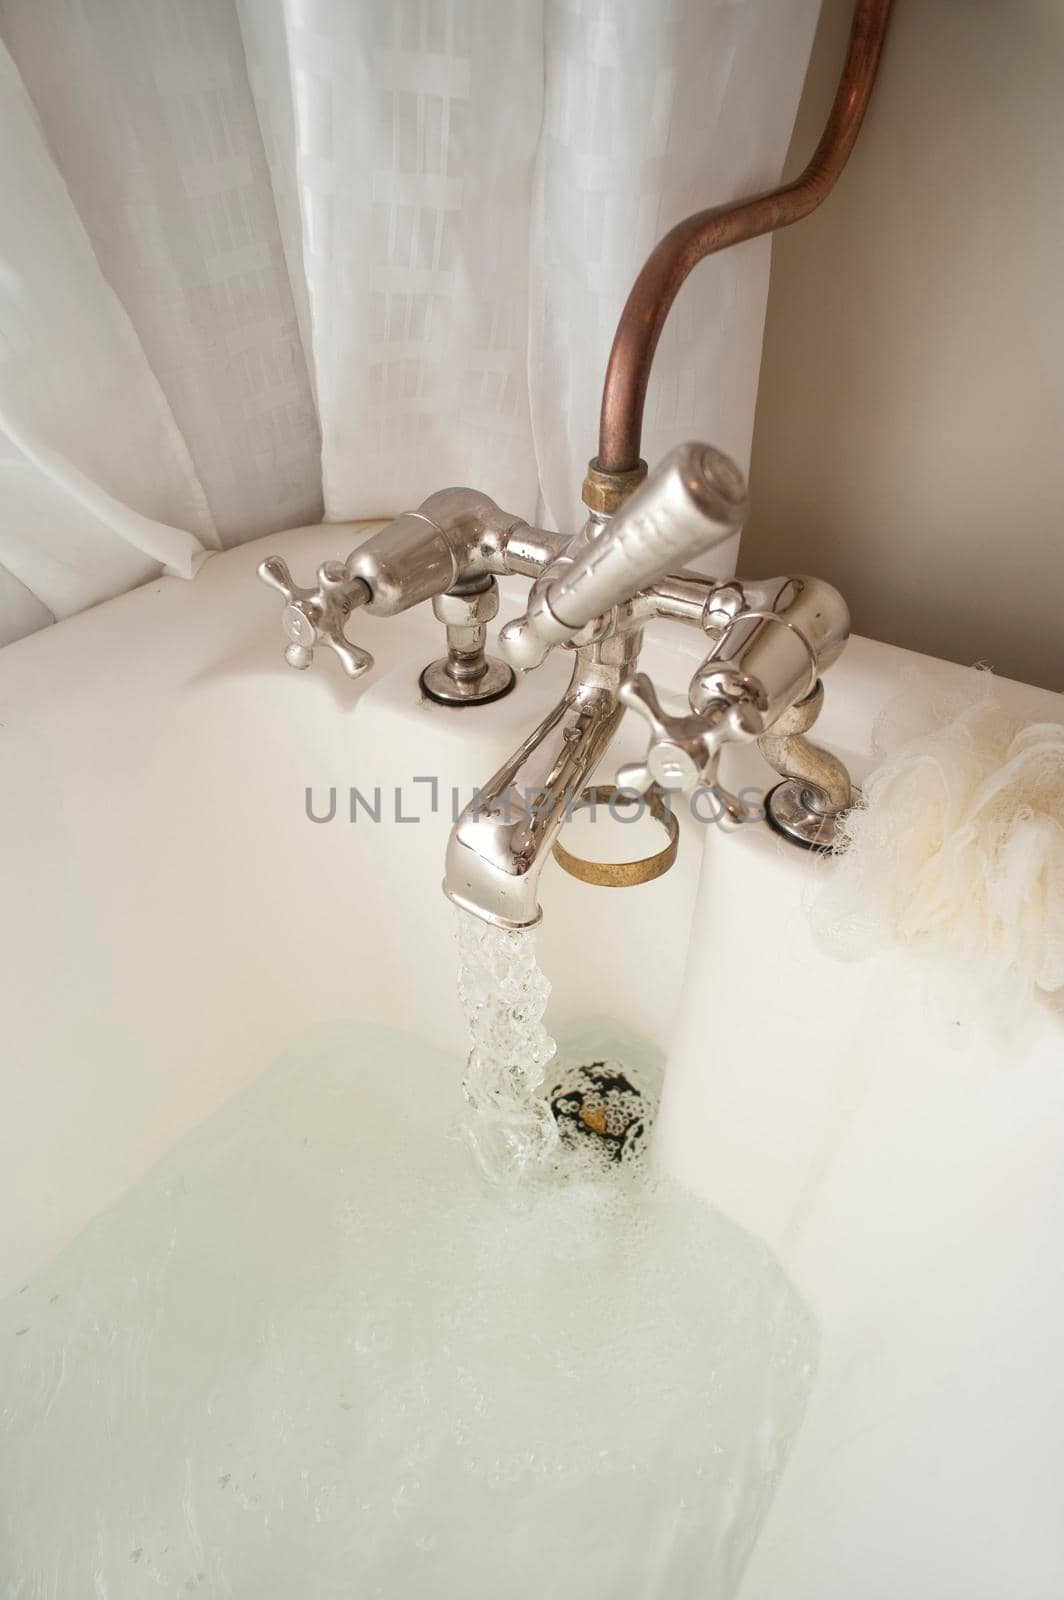 Retro bathroom tap mounted on a bathtub with inviting hot water filling the bath